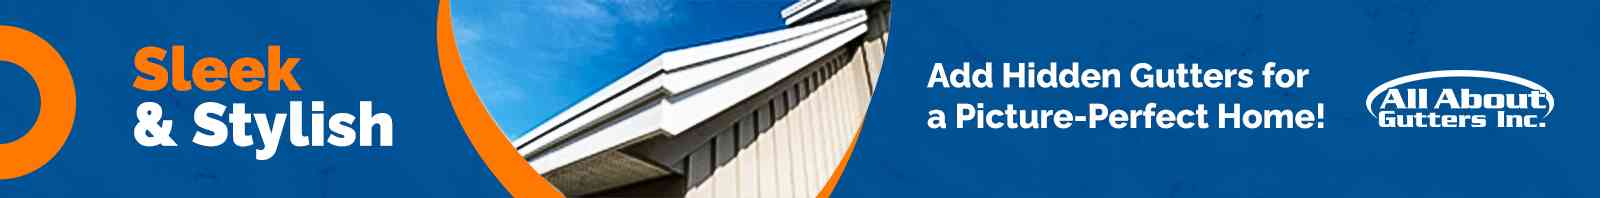 All About Gutters Advice Add Hidden Gutters for a Picture Perfect Home. Footer Image